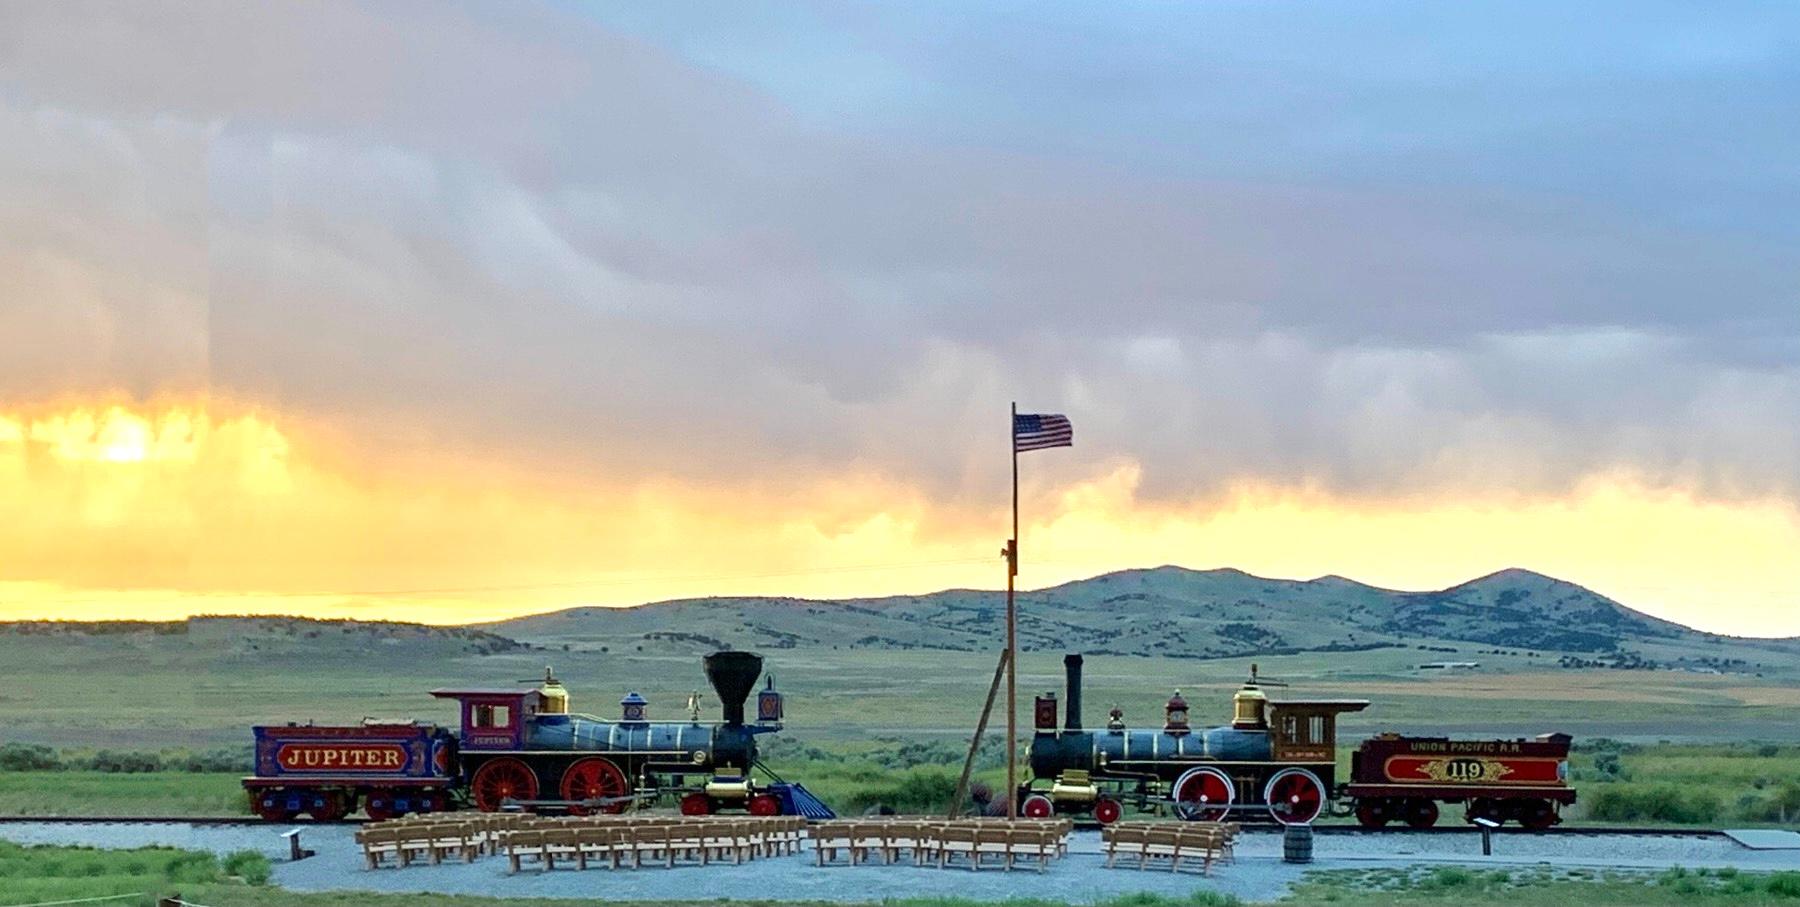 Sunset view of locomotives Jupiter and 119 at the Last Spike Site